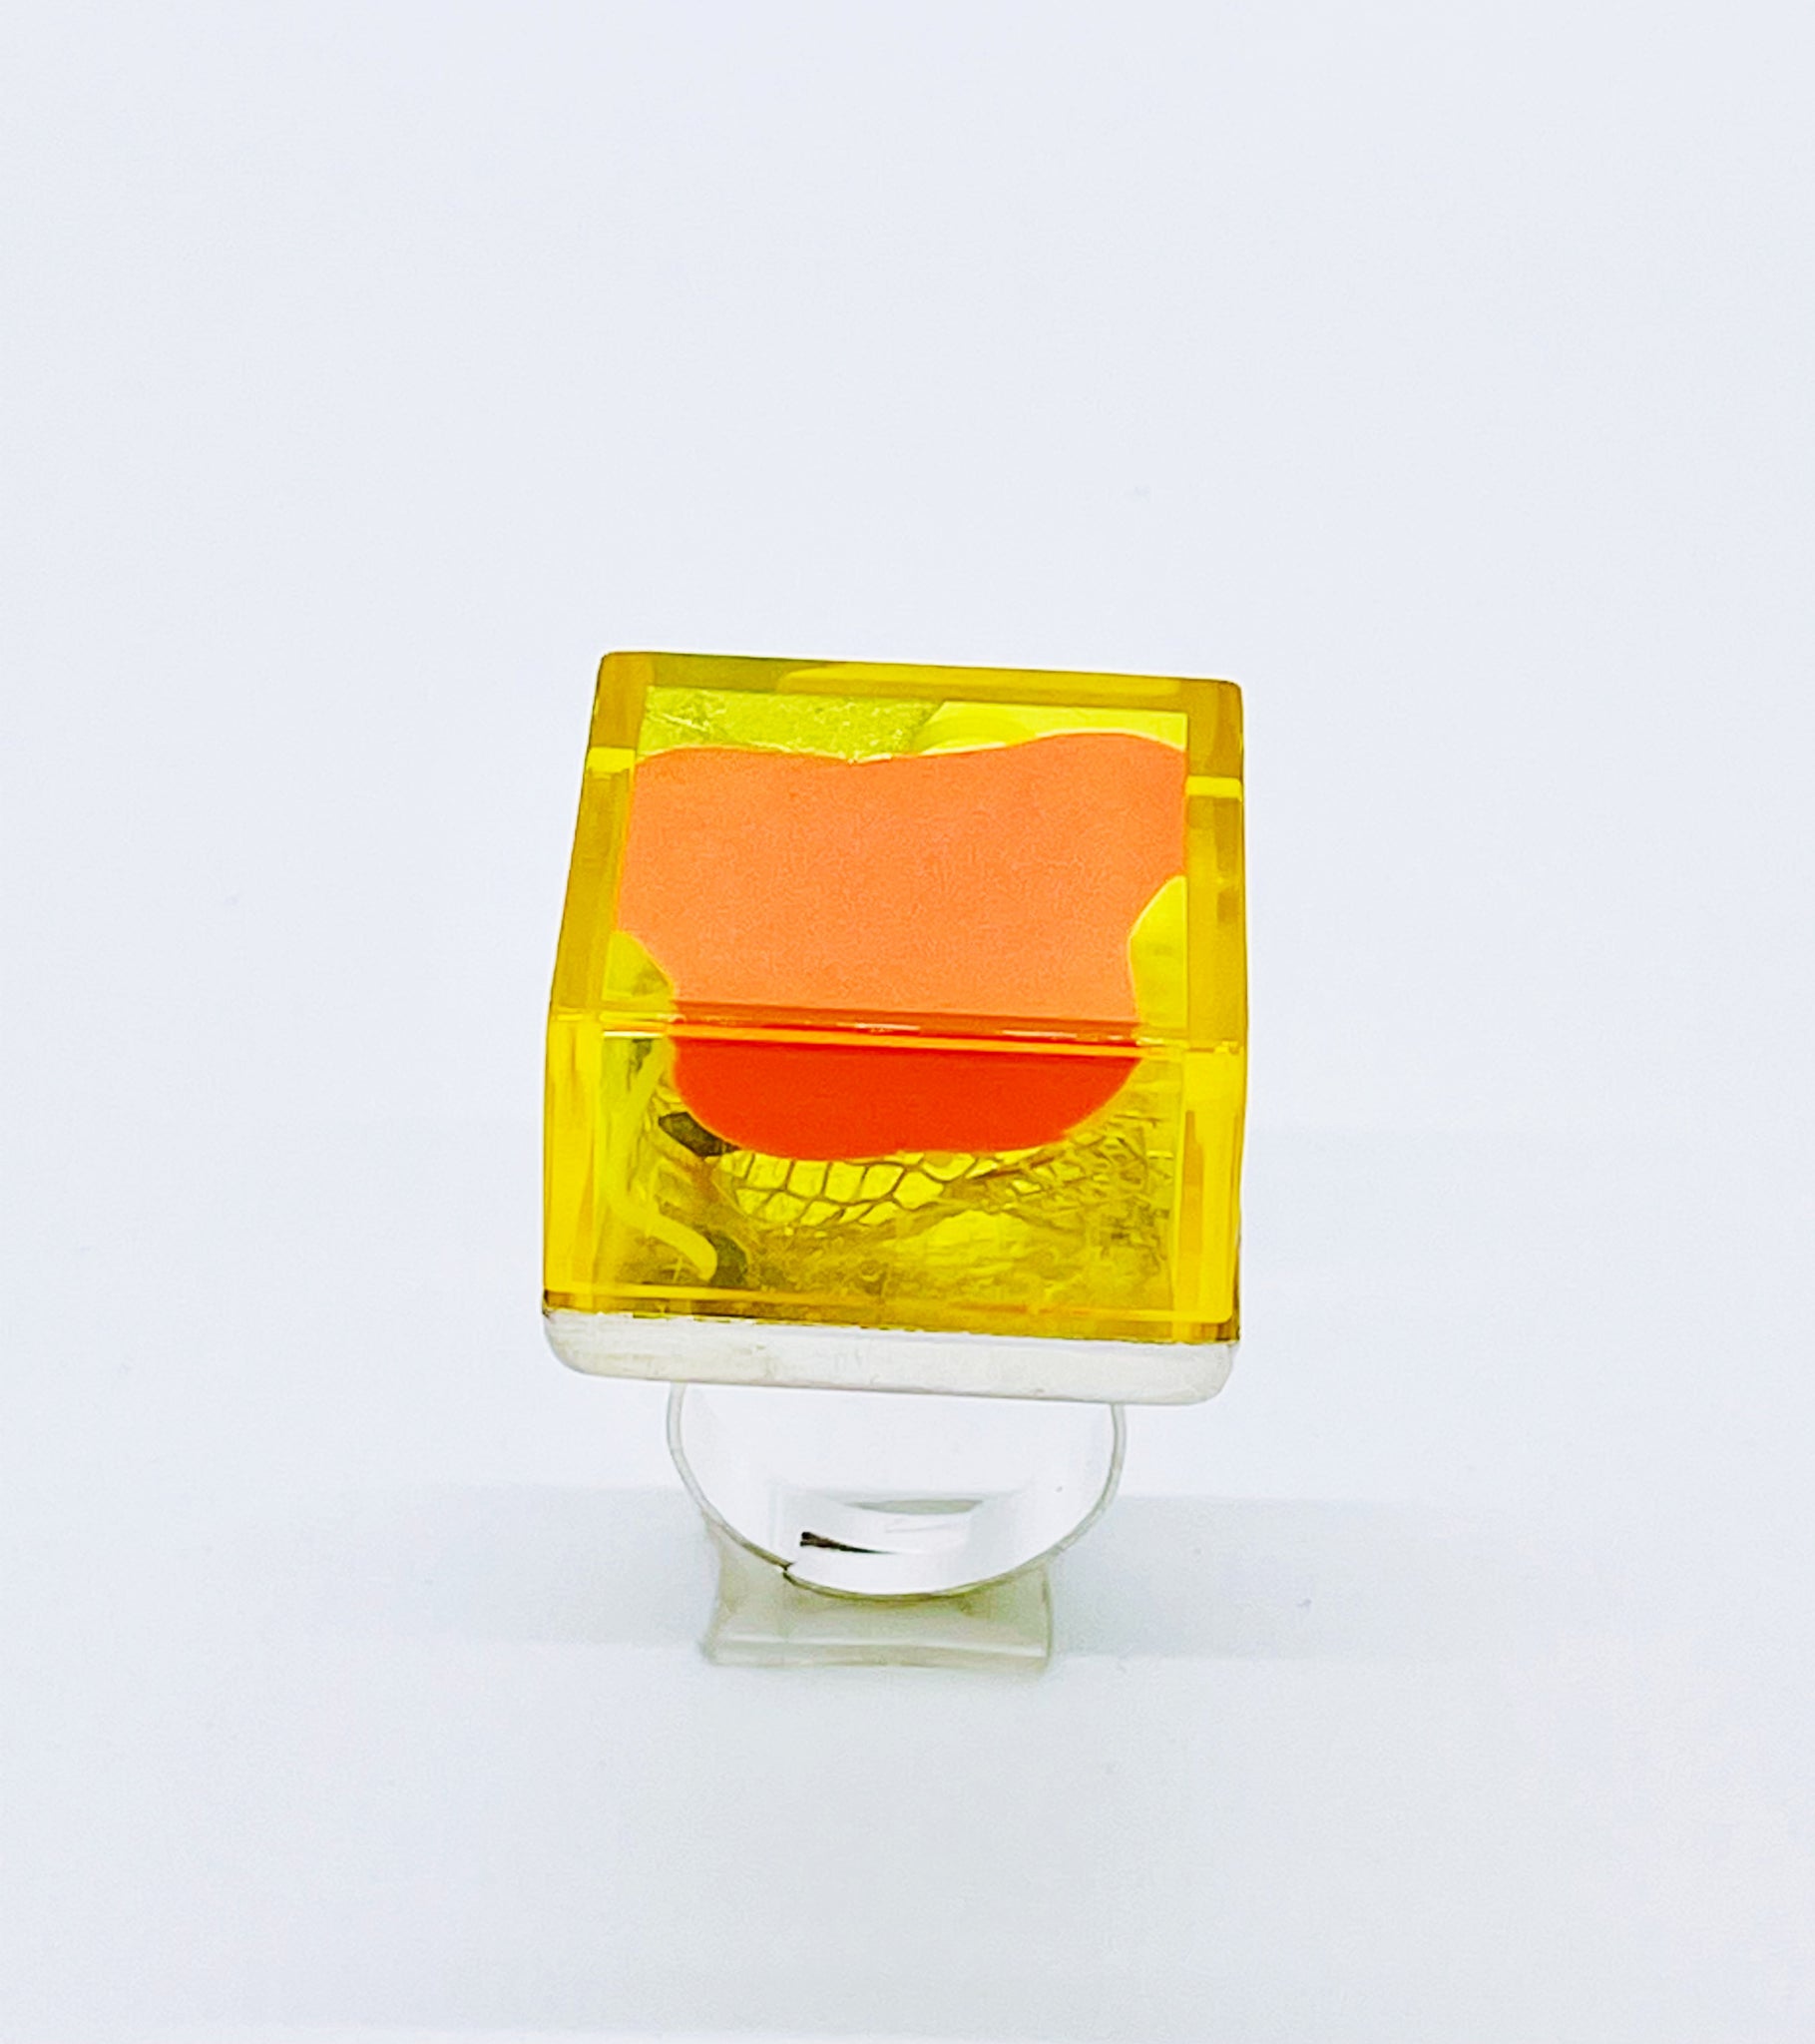 Yellow Fluorescent hand painted and sculpted art ring by Olga Alexander that is adjustable, offering 3 dimensional views!